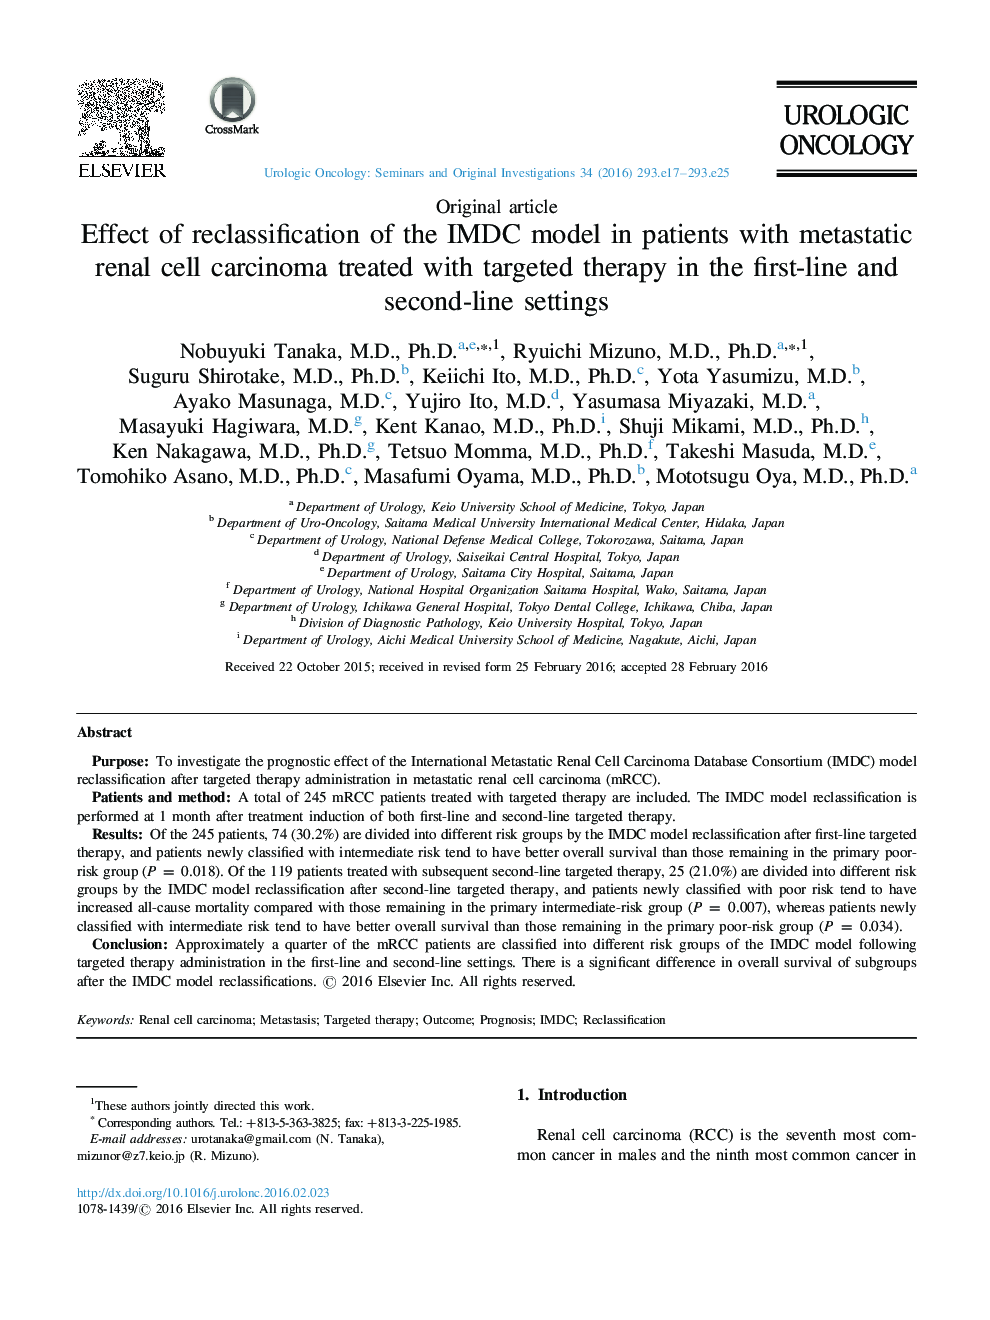 Effect of reclassification of the IMDC model in patients with metastatic renal cell carcinoma treated with targeted therapy in the first-line and second-line settings